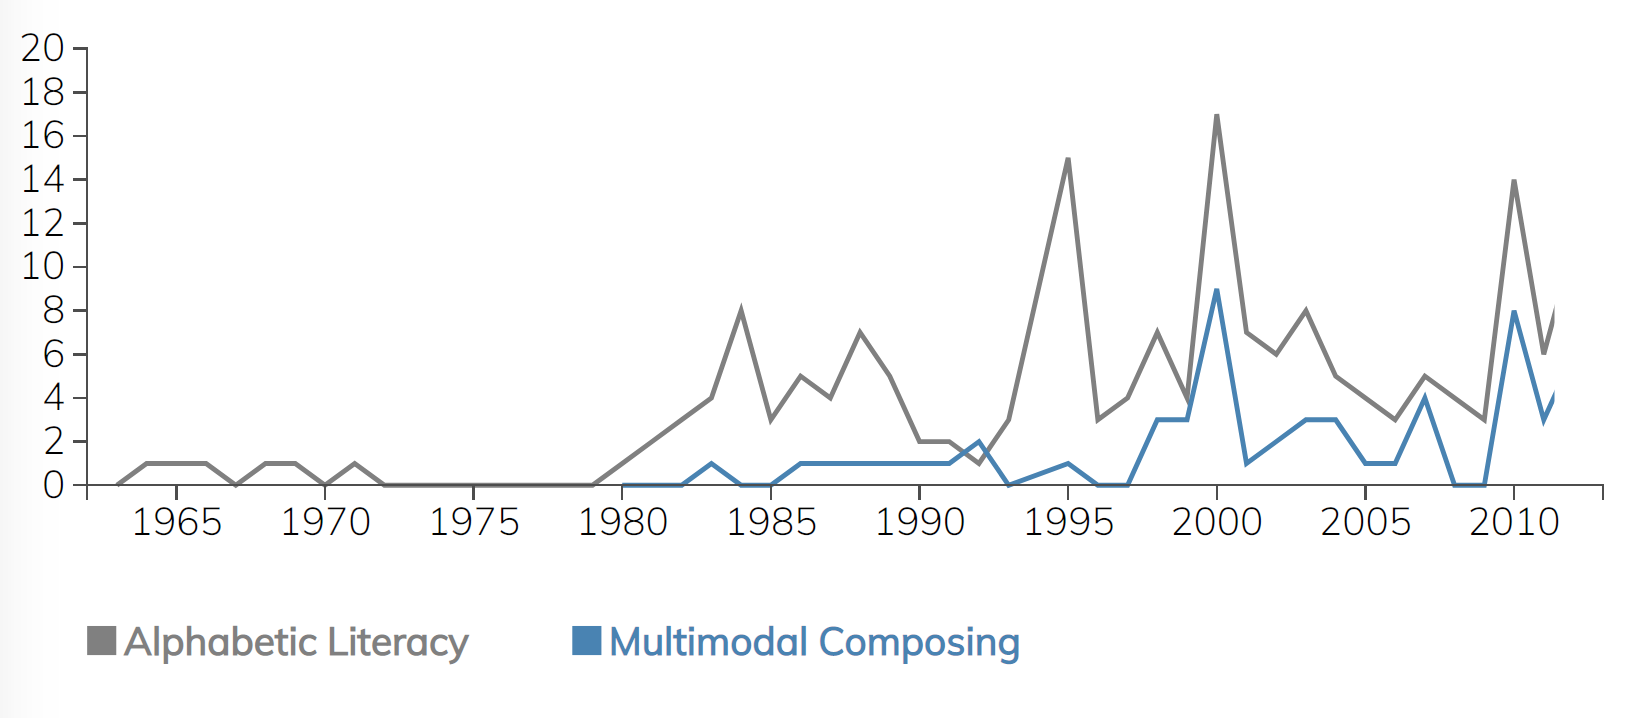 Bar graph of computer articles focusing on alphabetic vs multimodal composing; read table below for data.